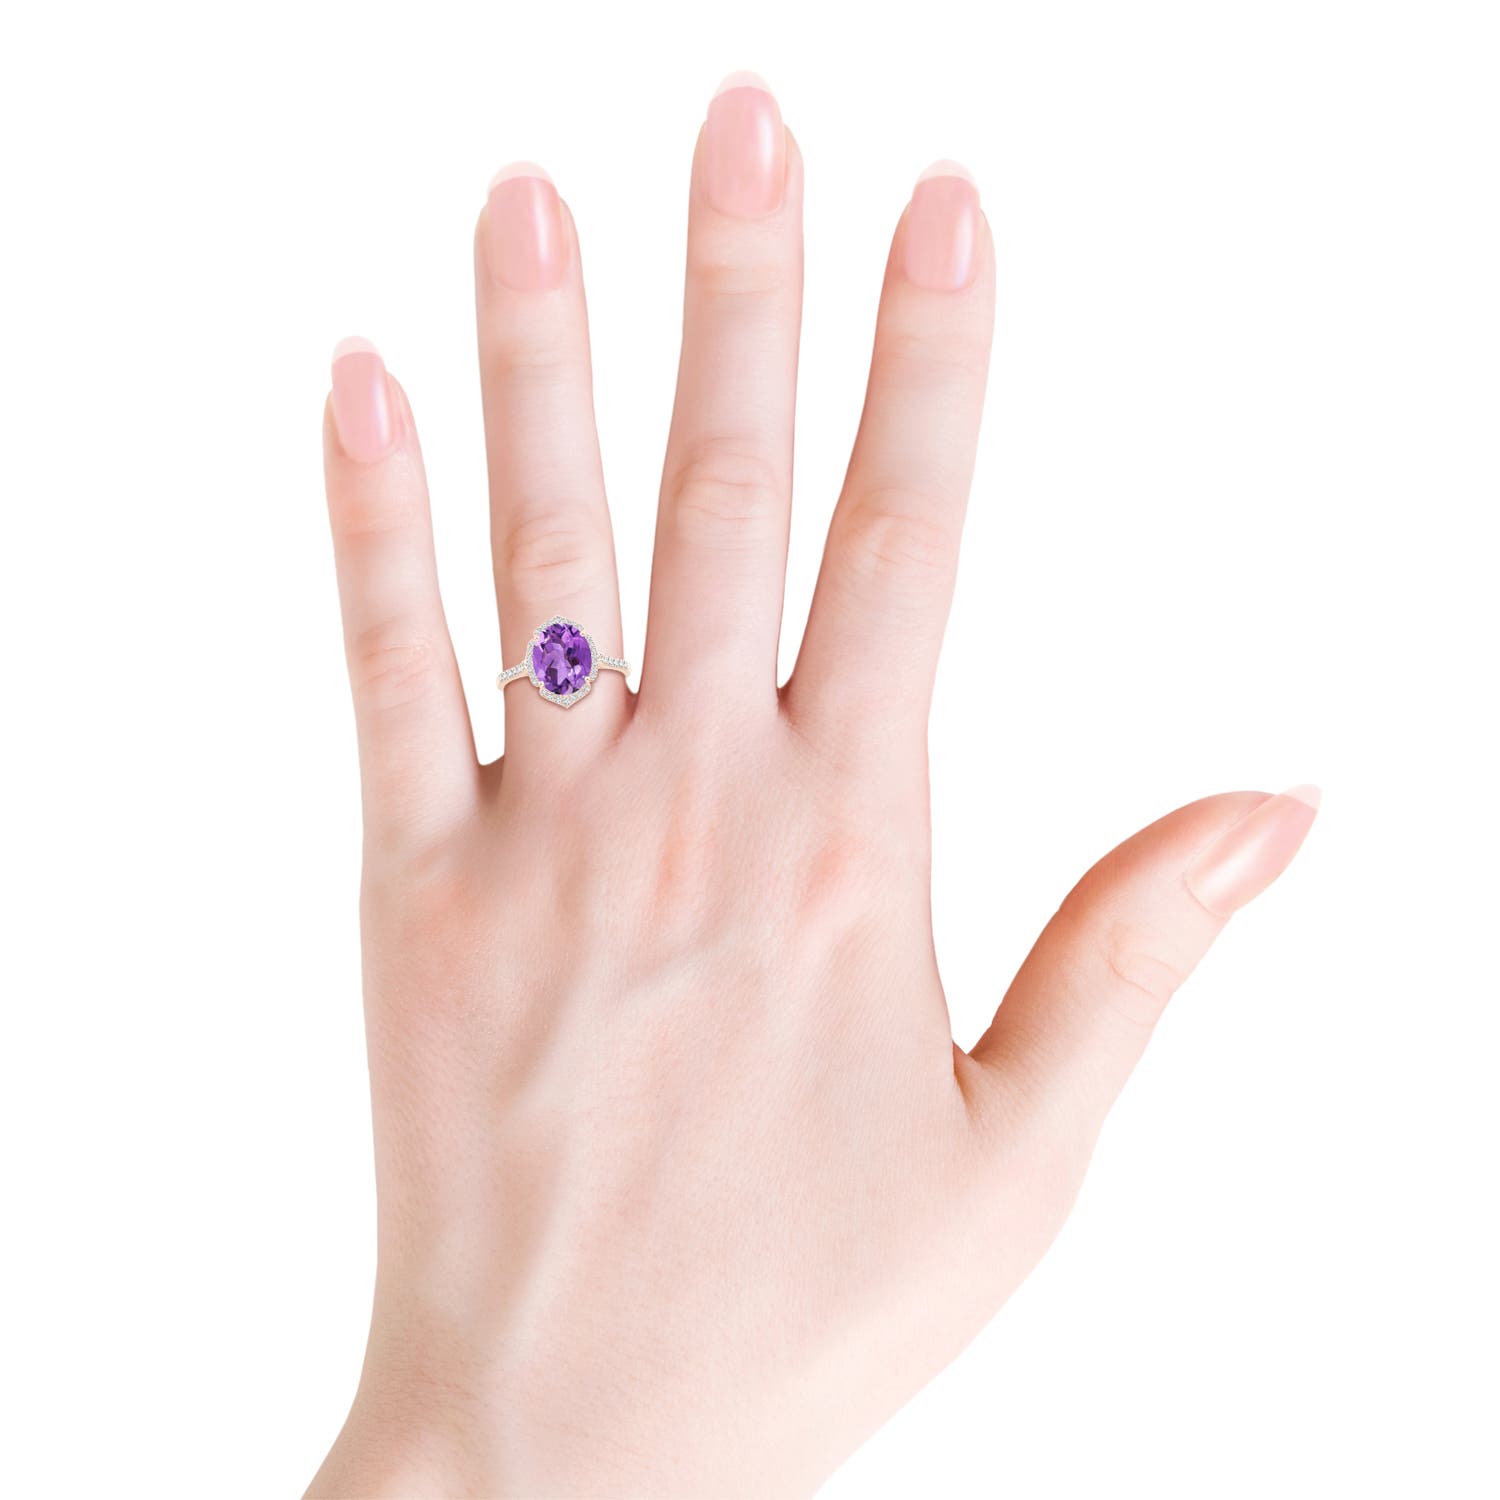 AA - Amethyst / 2.51 CT / 14 KT Rose Gold